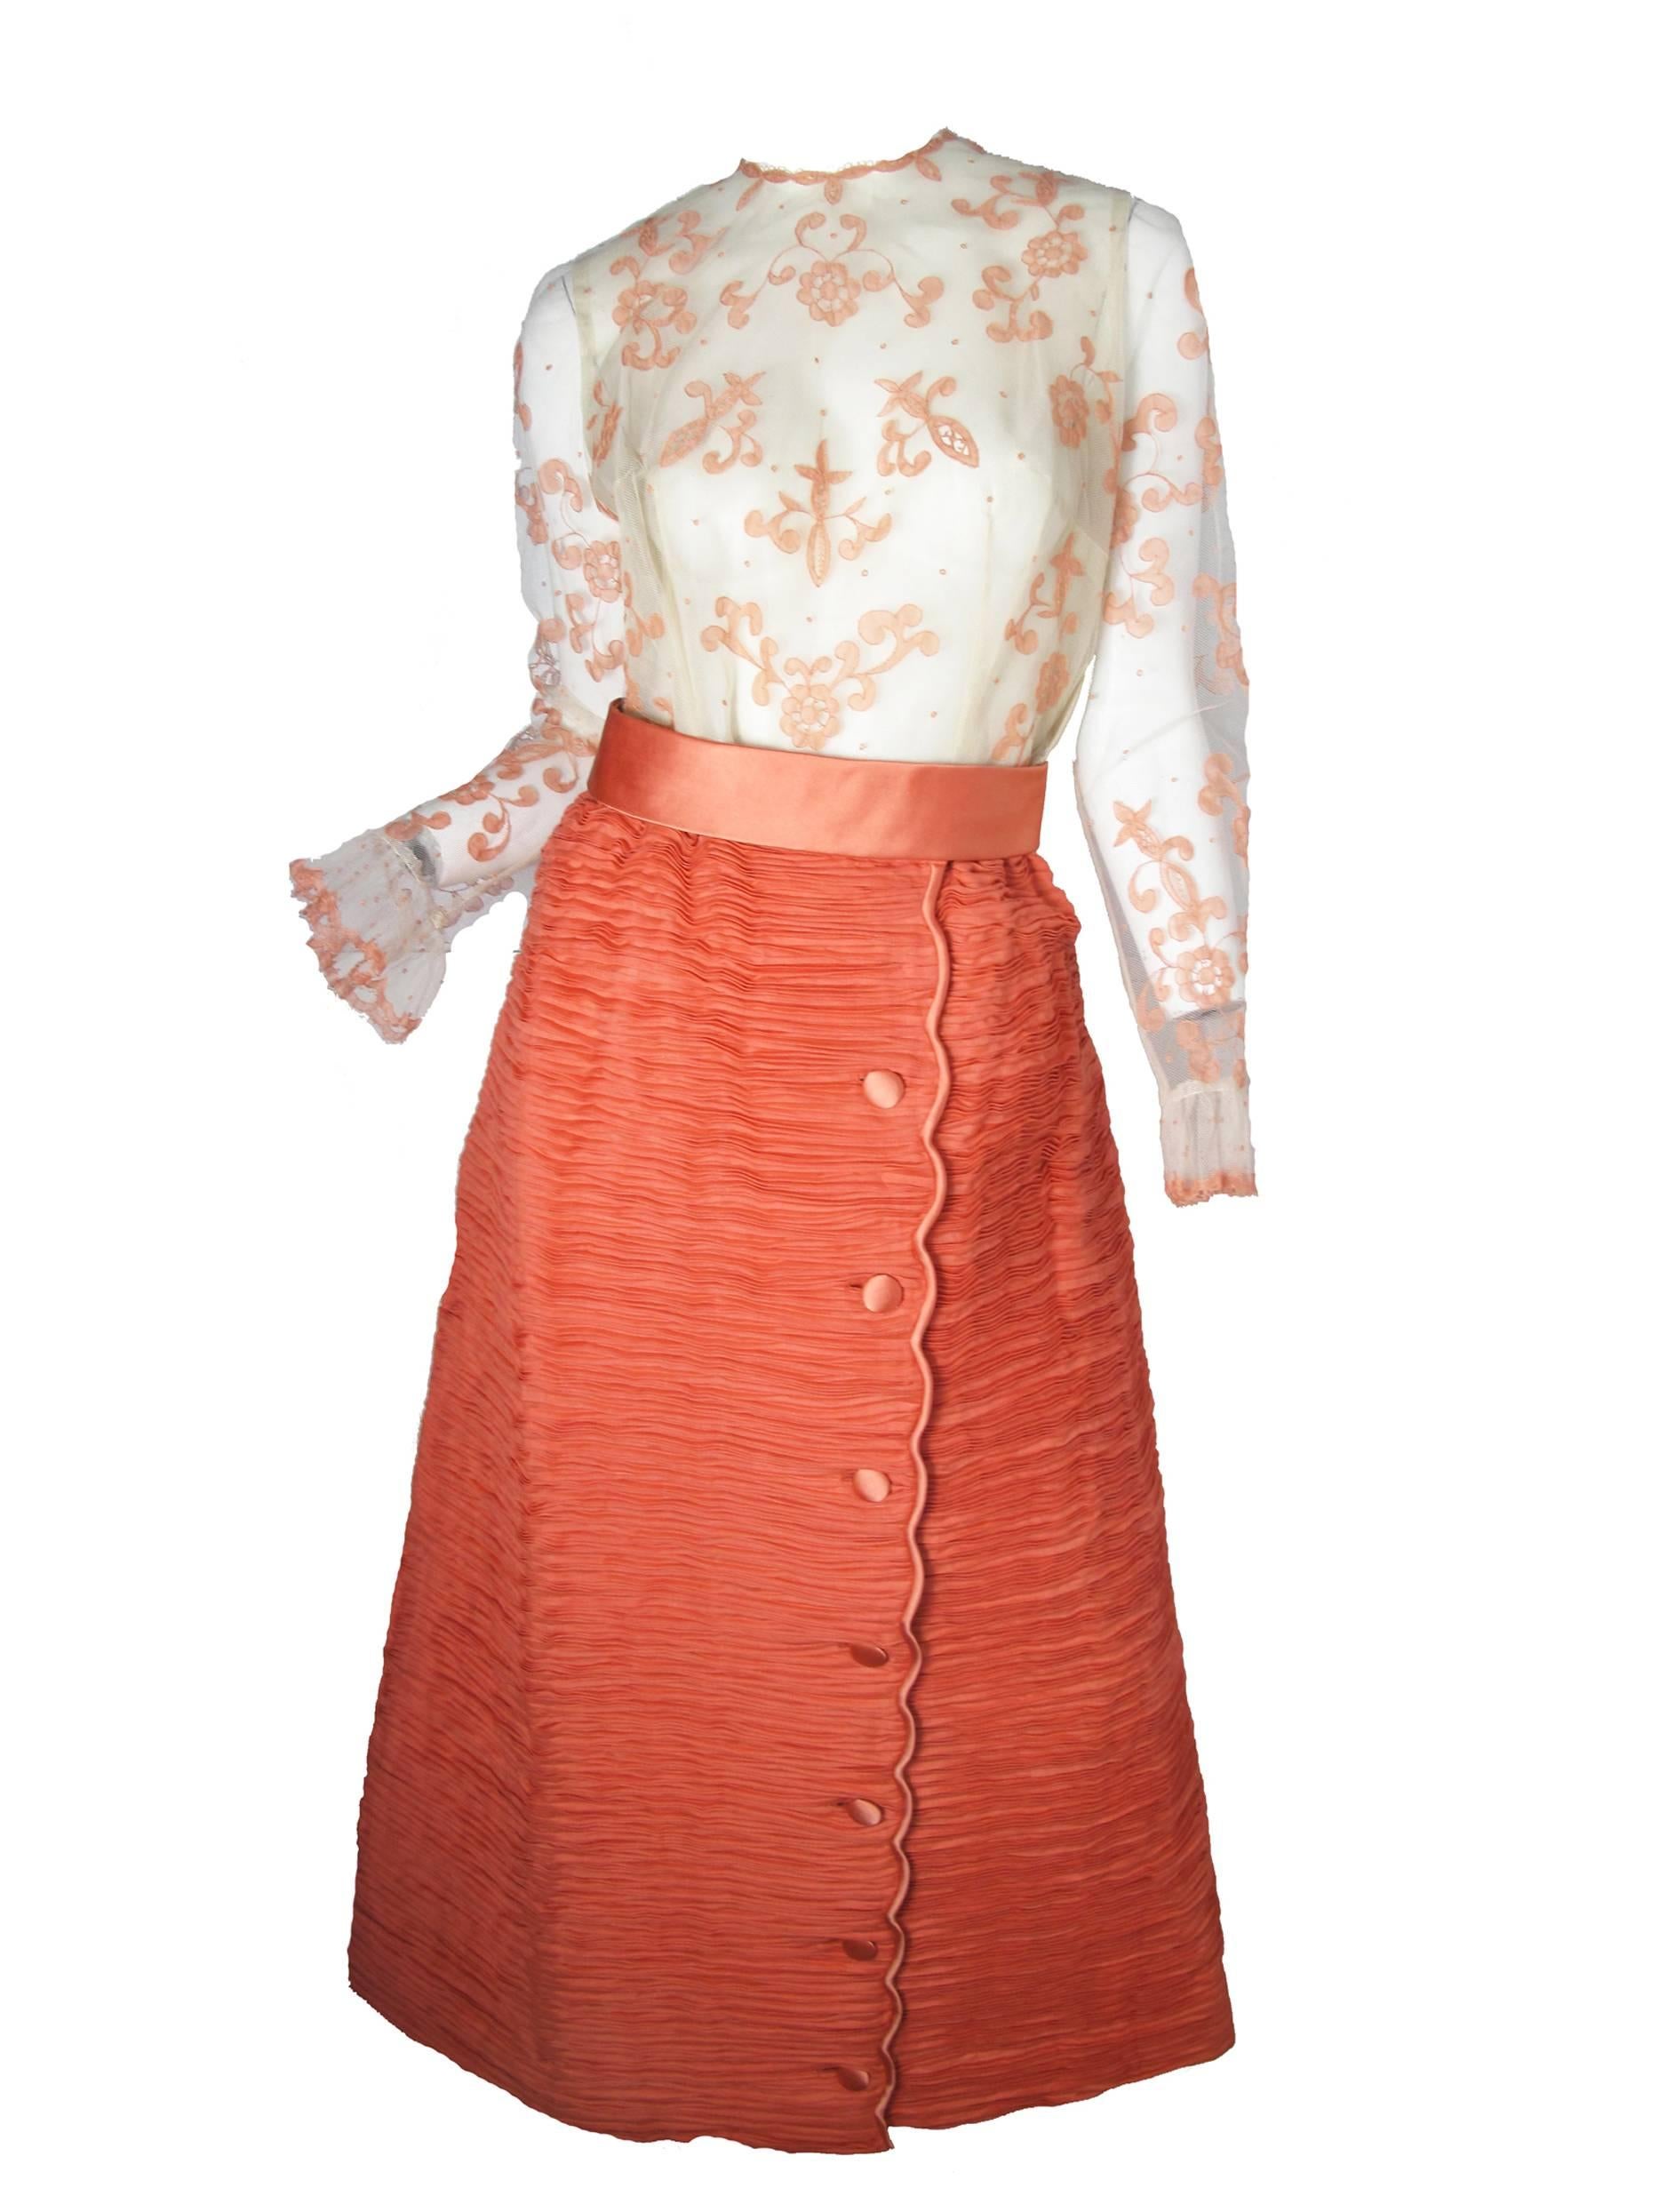 1960s Sybil Connolly labeled "softly spoken" off white mesh shirt with pink lace overlay.  Pleated Irish linen peachy/pink skirt with buttons down front. Condition: Excellent. Size 10
Top: 36" bust, 31" waist, 42" hips,